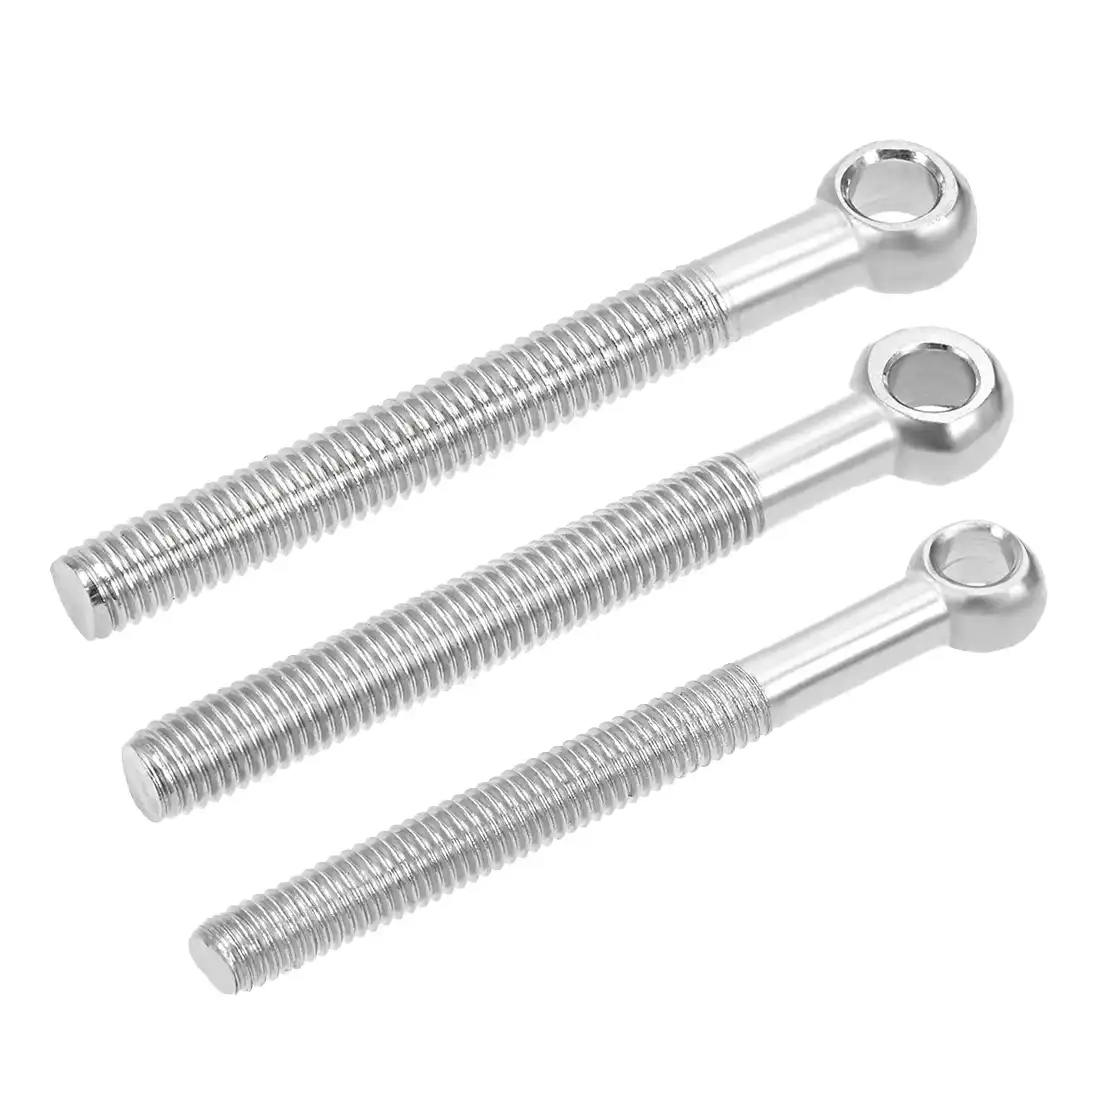 uxcell M6 x 30mm 304 Stainless Steel Machine Shoulder Lift Eye Bolt Rigging 10pcs Silver Tone 